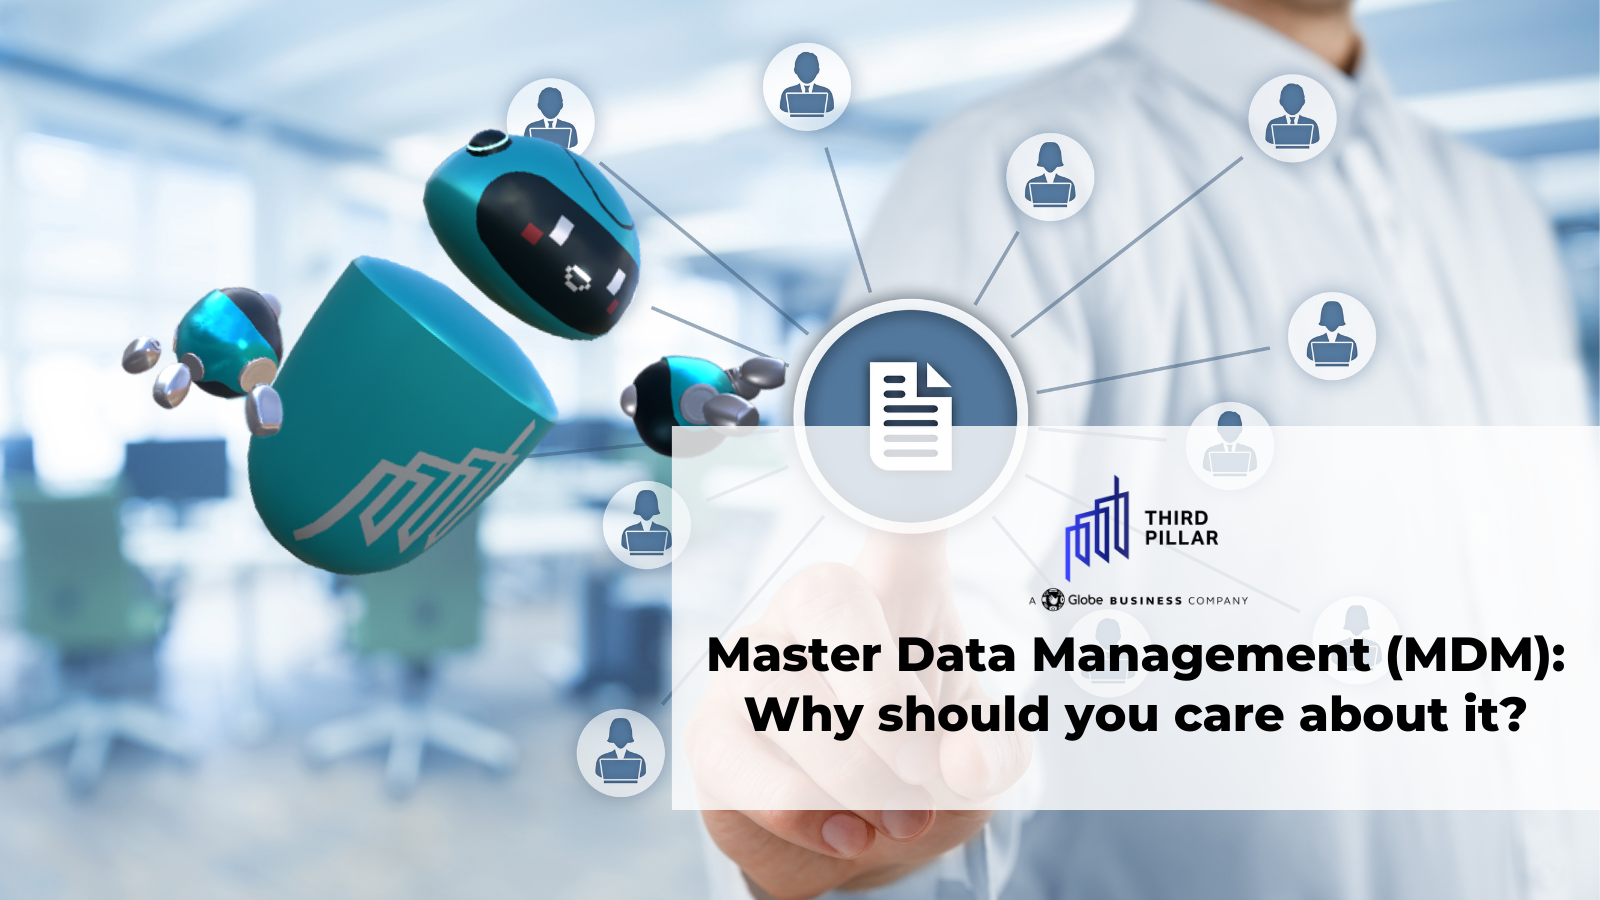 Master Data Management (MDM): Why should you care about it?